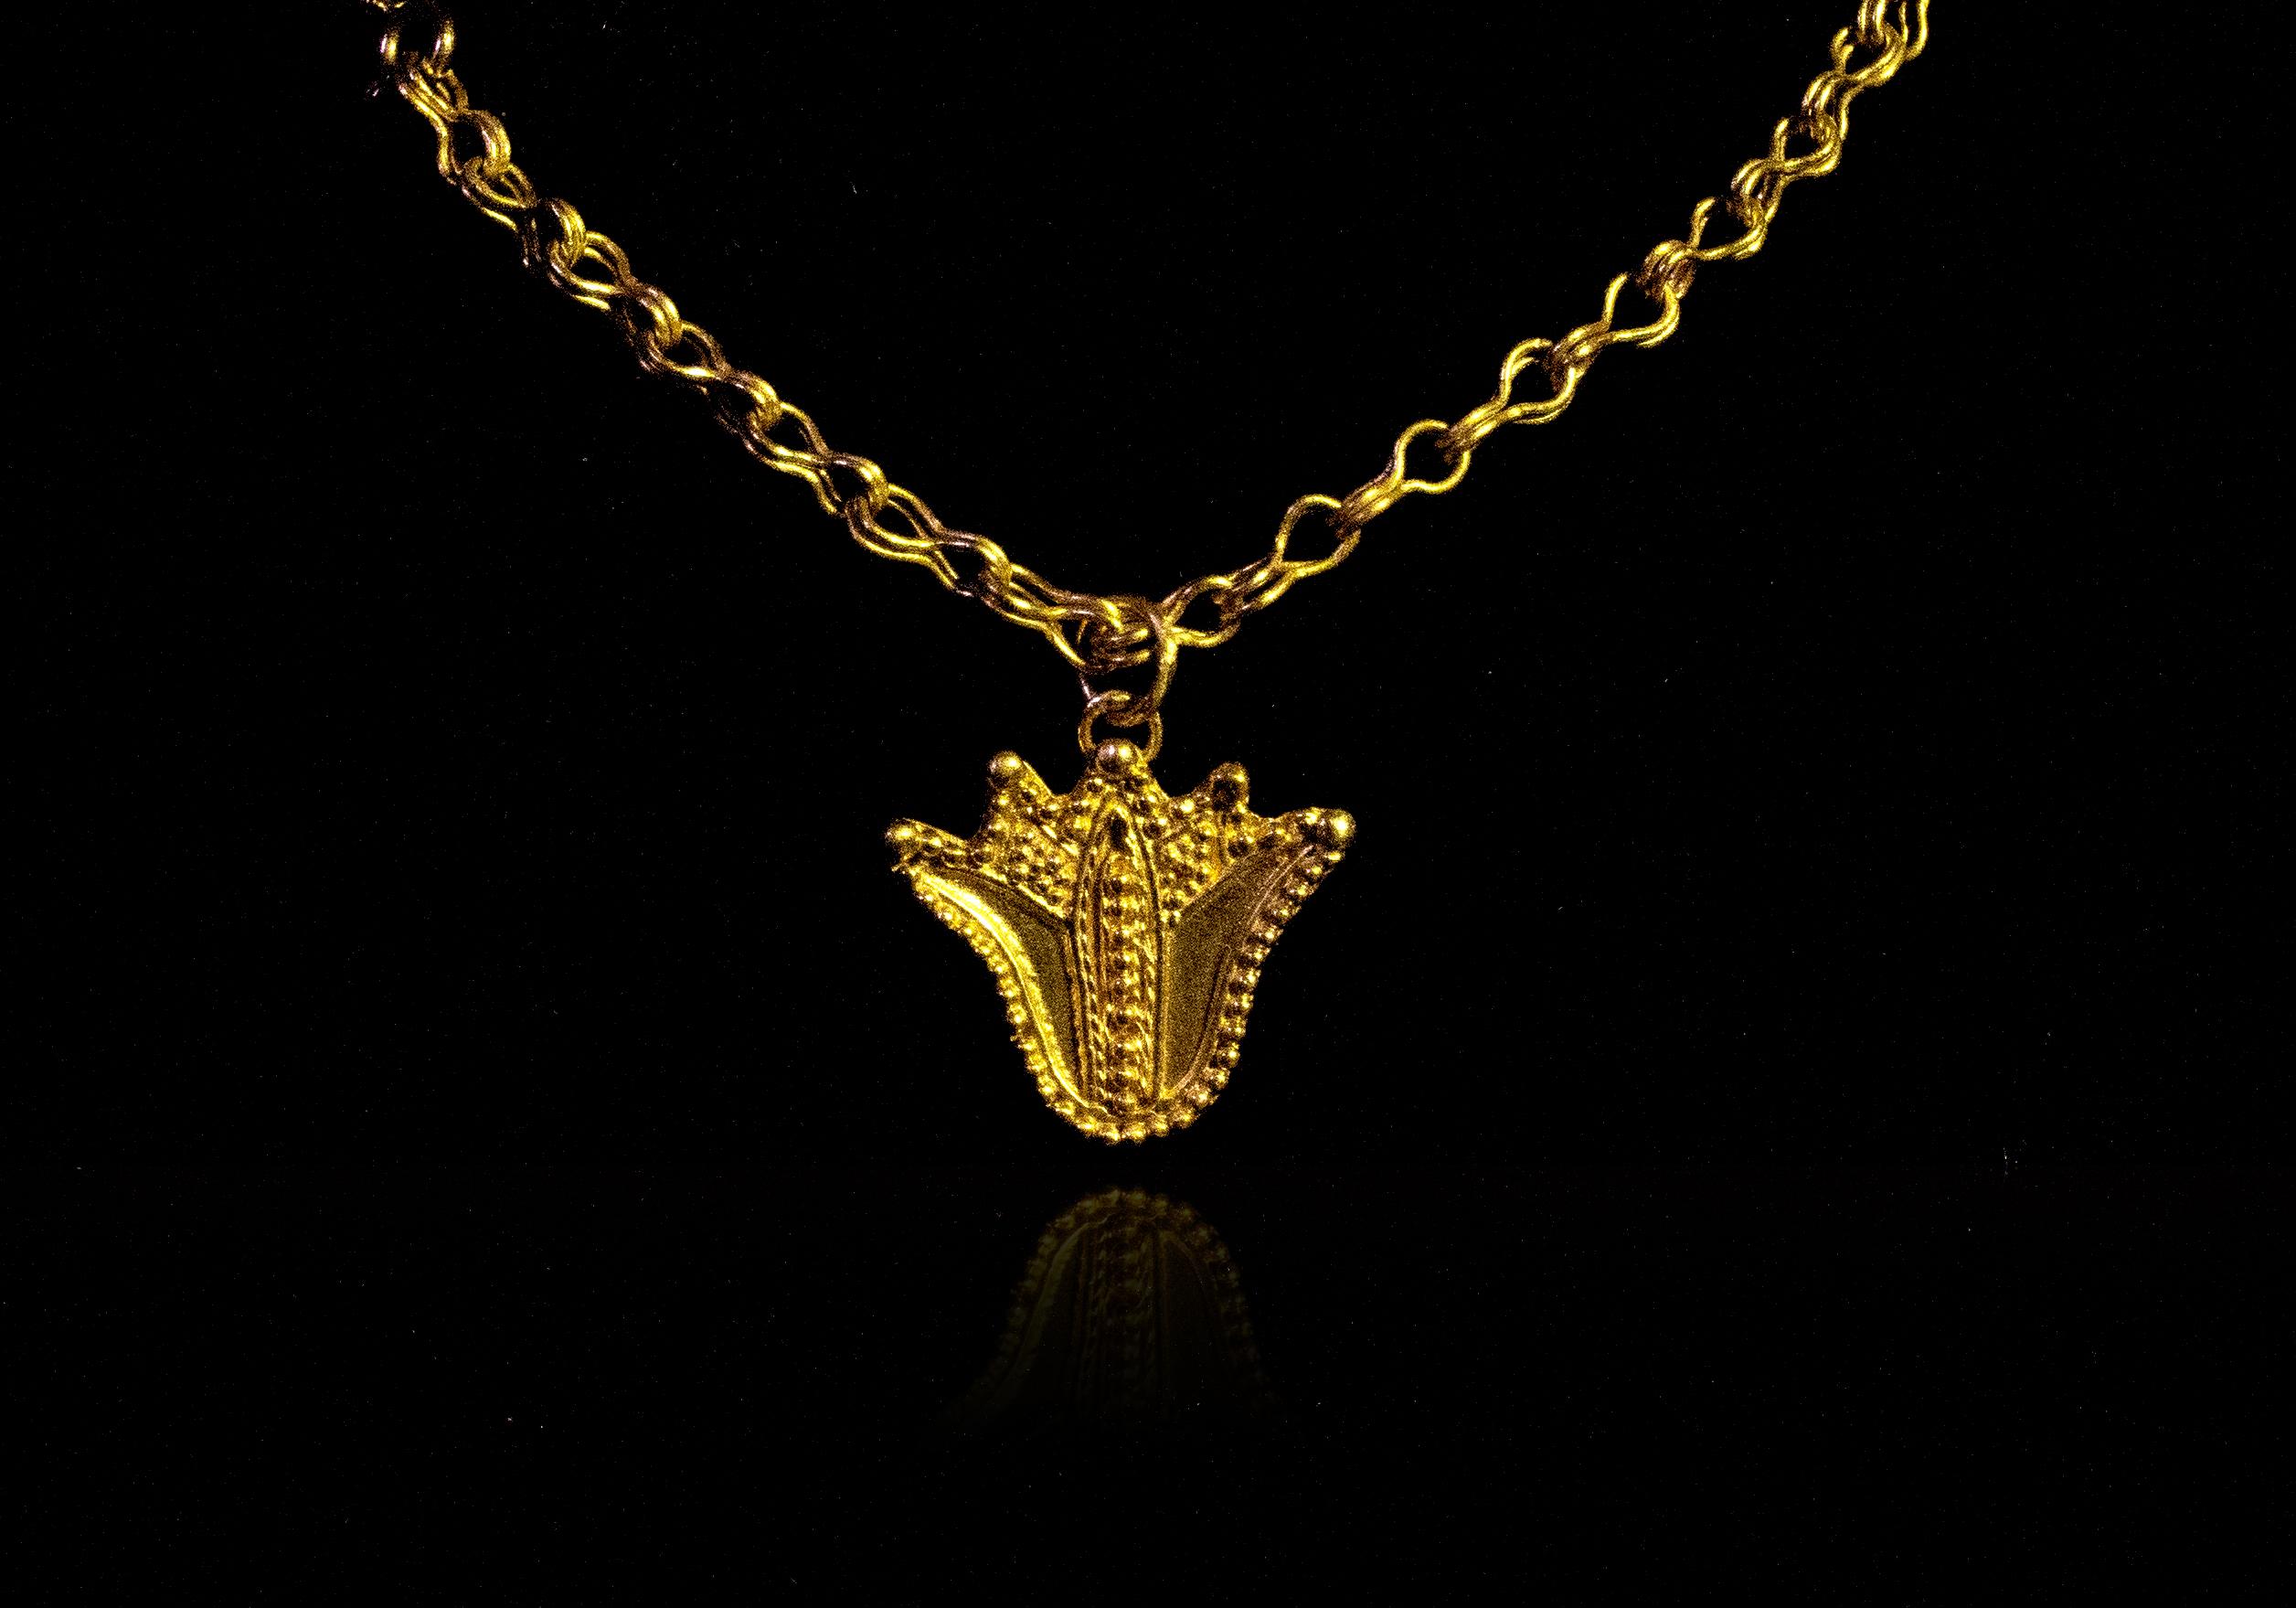 -Available
-One of a kind
-22K gold
-Stamped with Nebu logo

Introducing our exquisite one-of-a-kind lotus pendant, meticulously crafted in 22K gold using the ancient and intricate technique of granulation. This delicate and time-honored method,